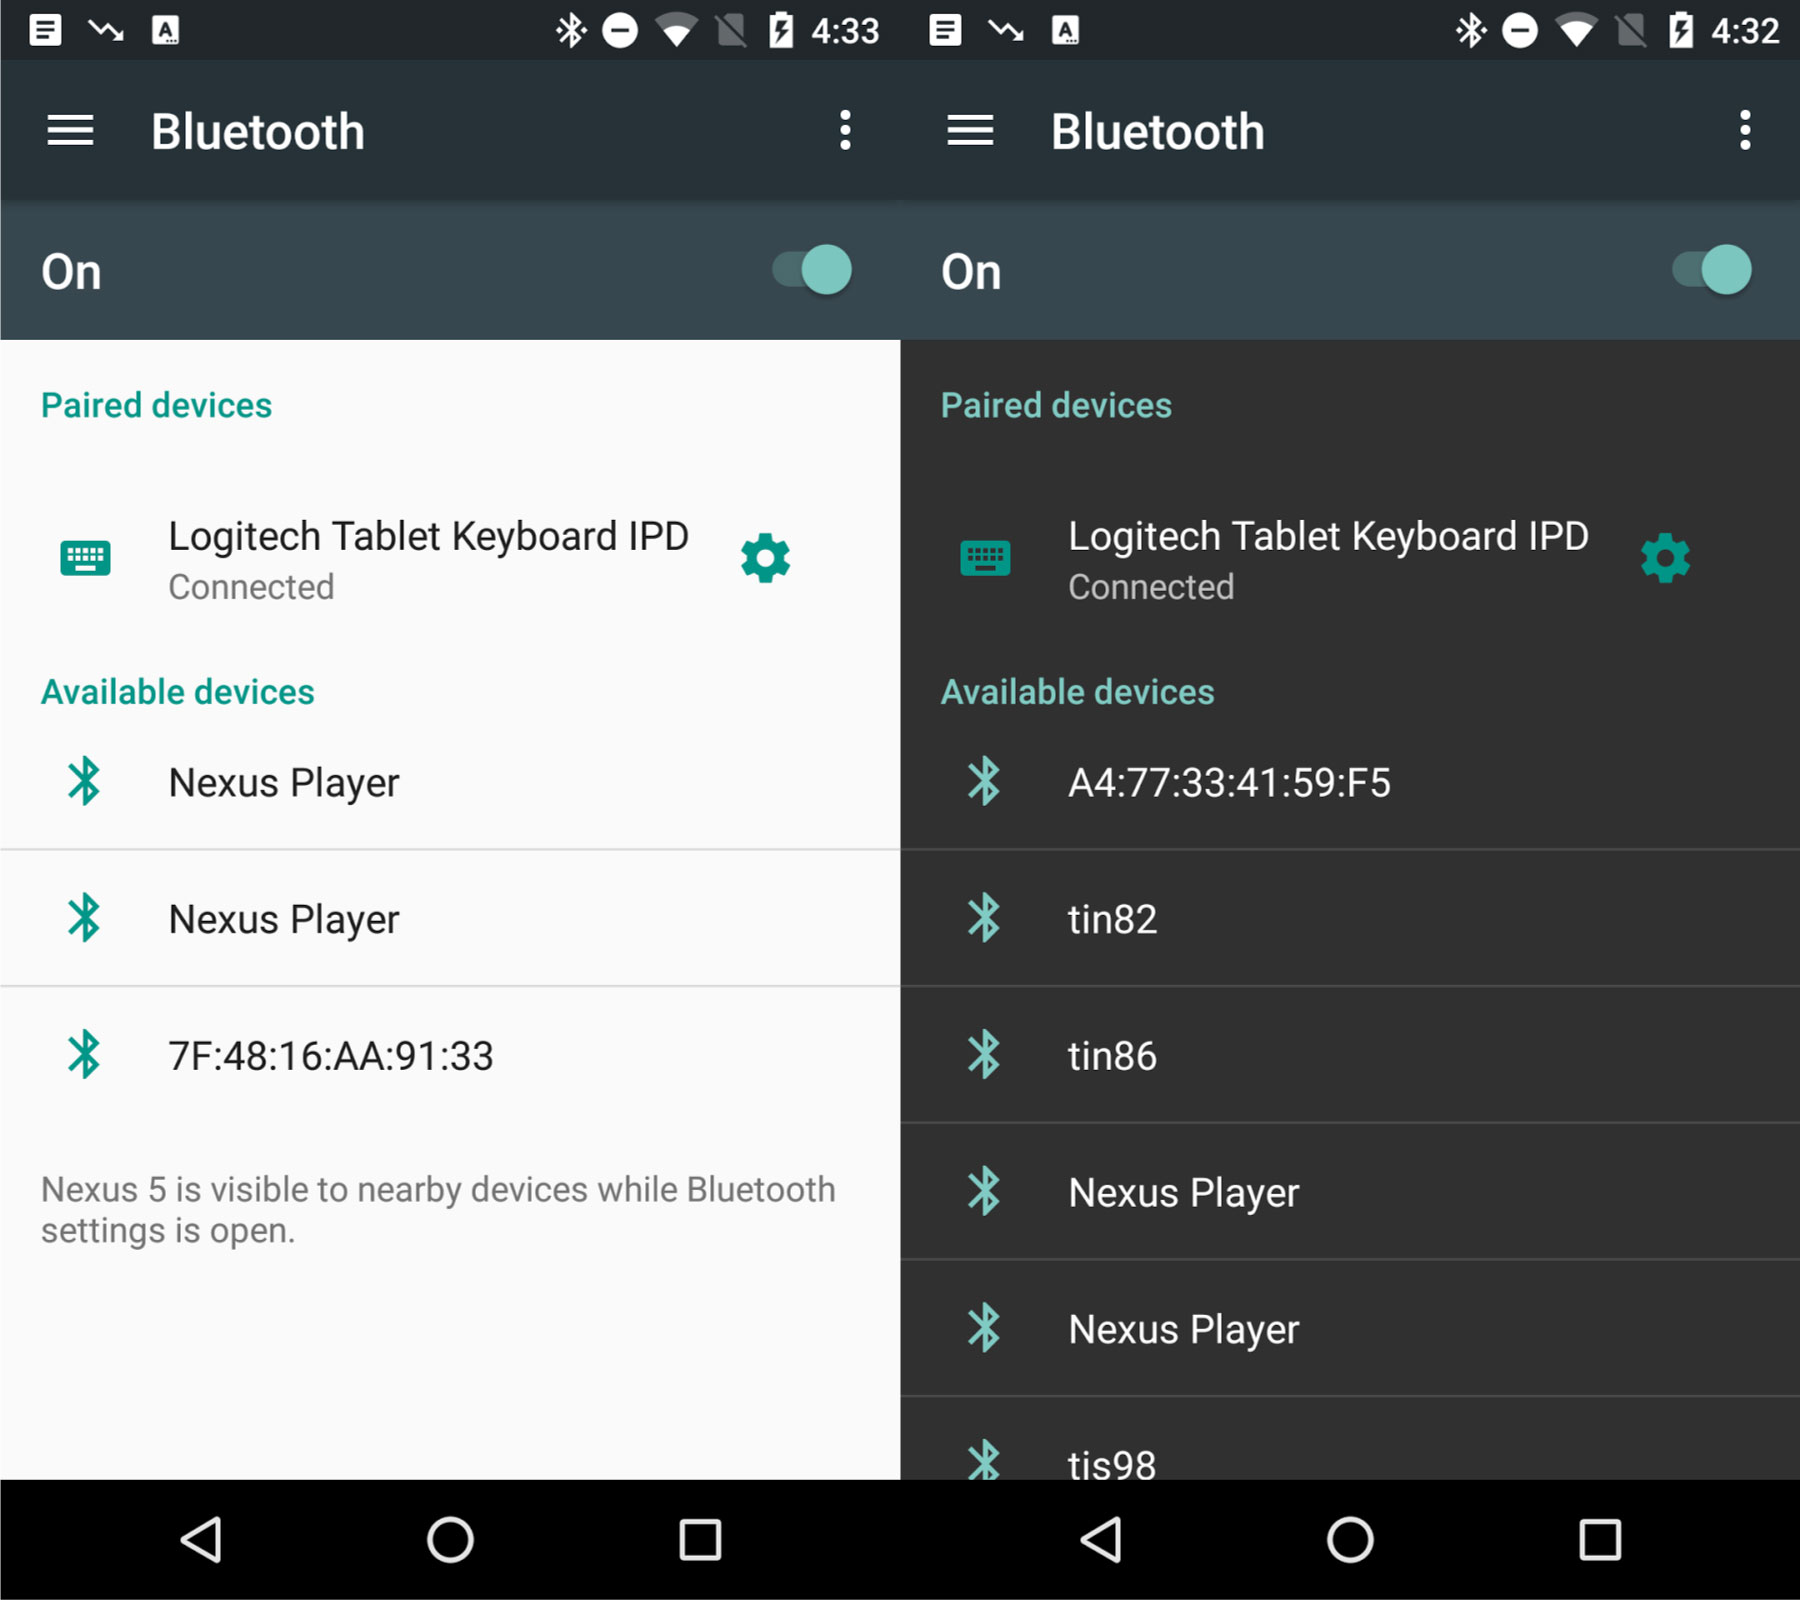 Android 'N' settings app may include quick navigation menu - MobileSyrup